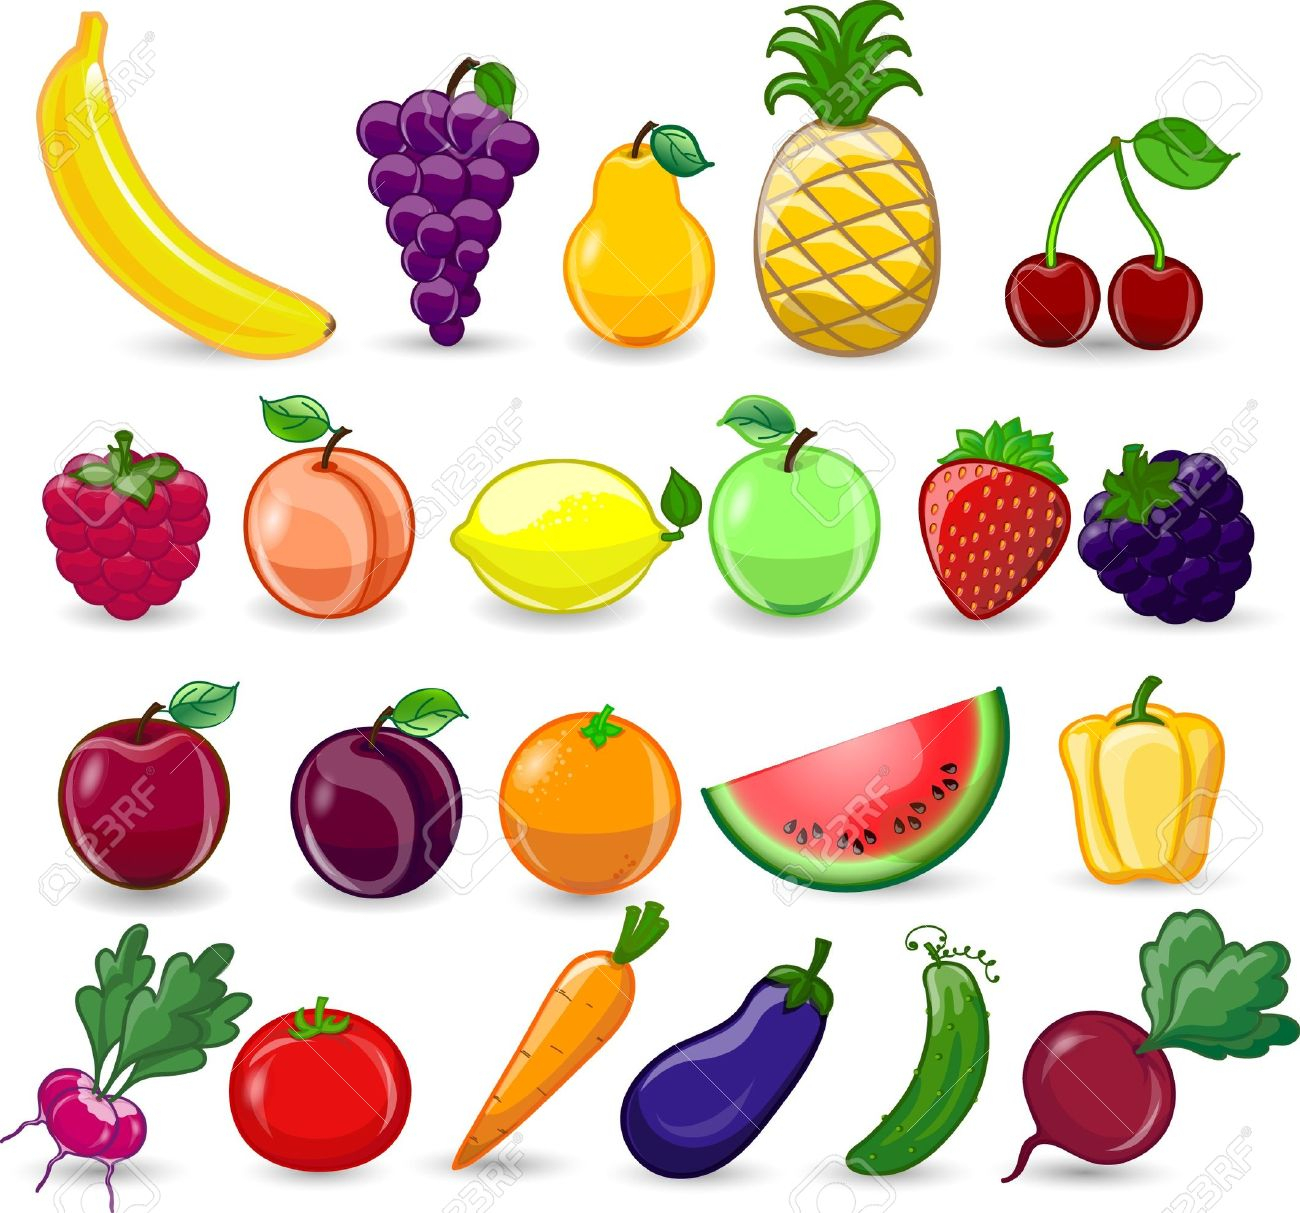 Drawing Pictures Of Fruits And Vegetables at GetDrawings Free download